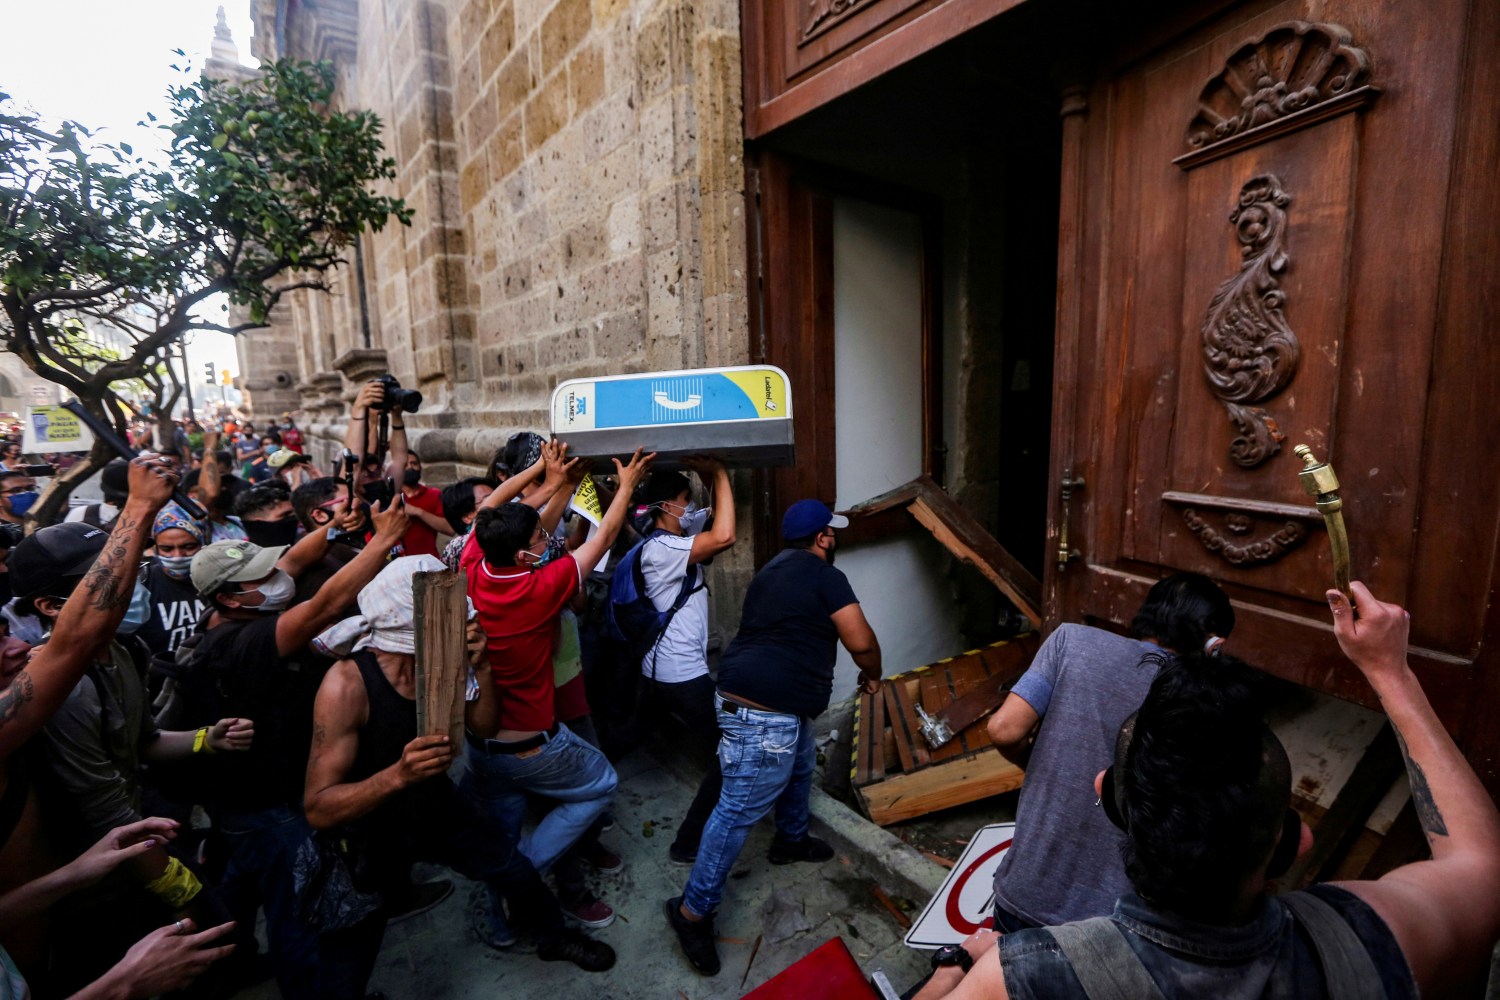 Demonstrators smash down a door of the Jalisco State Government Palace during a protest to demand justice for Giovanni Lopez, a construction worker who died after being arrested for not wearing a face mask in public, during the coronavirus disease (COVID-19) outbreak in Guadalajara, Mexico June 4, 2020. REUTERS/Fernando Carranza     TPX IMAGES OF THE DAY